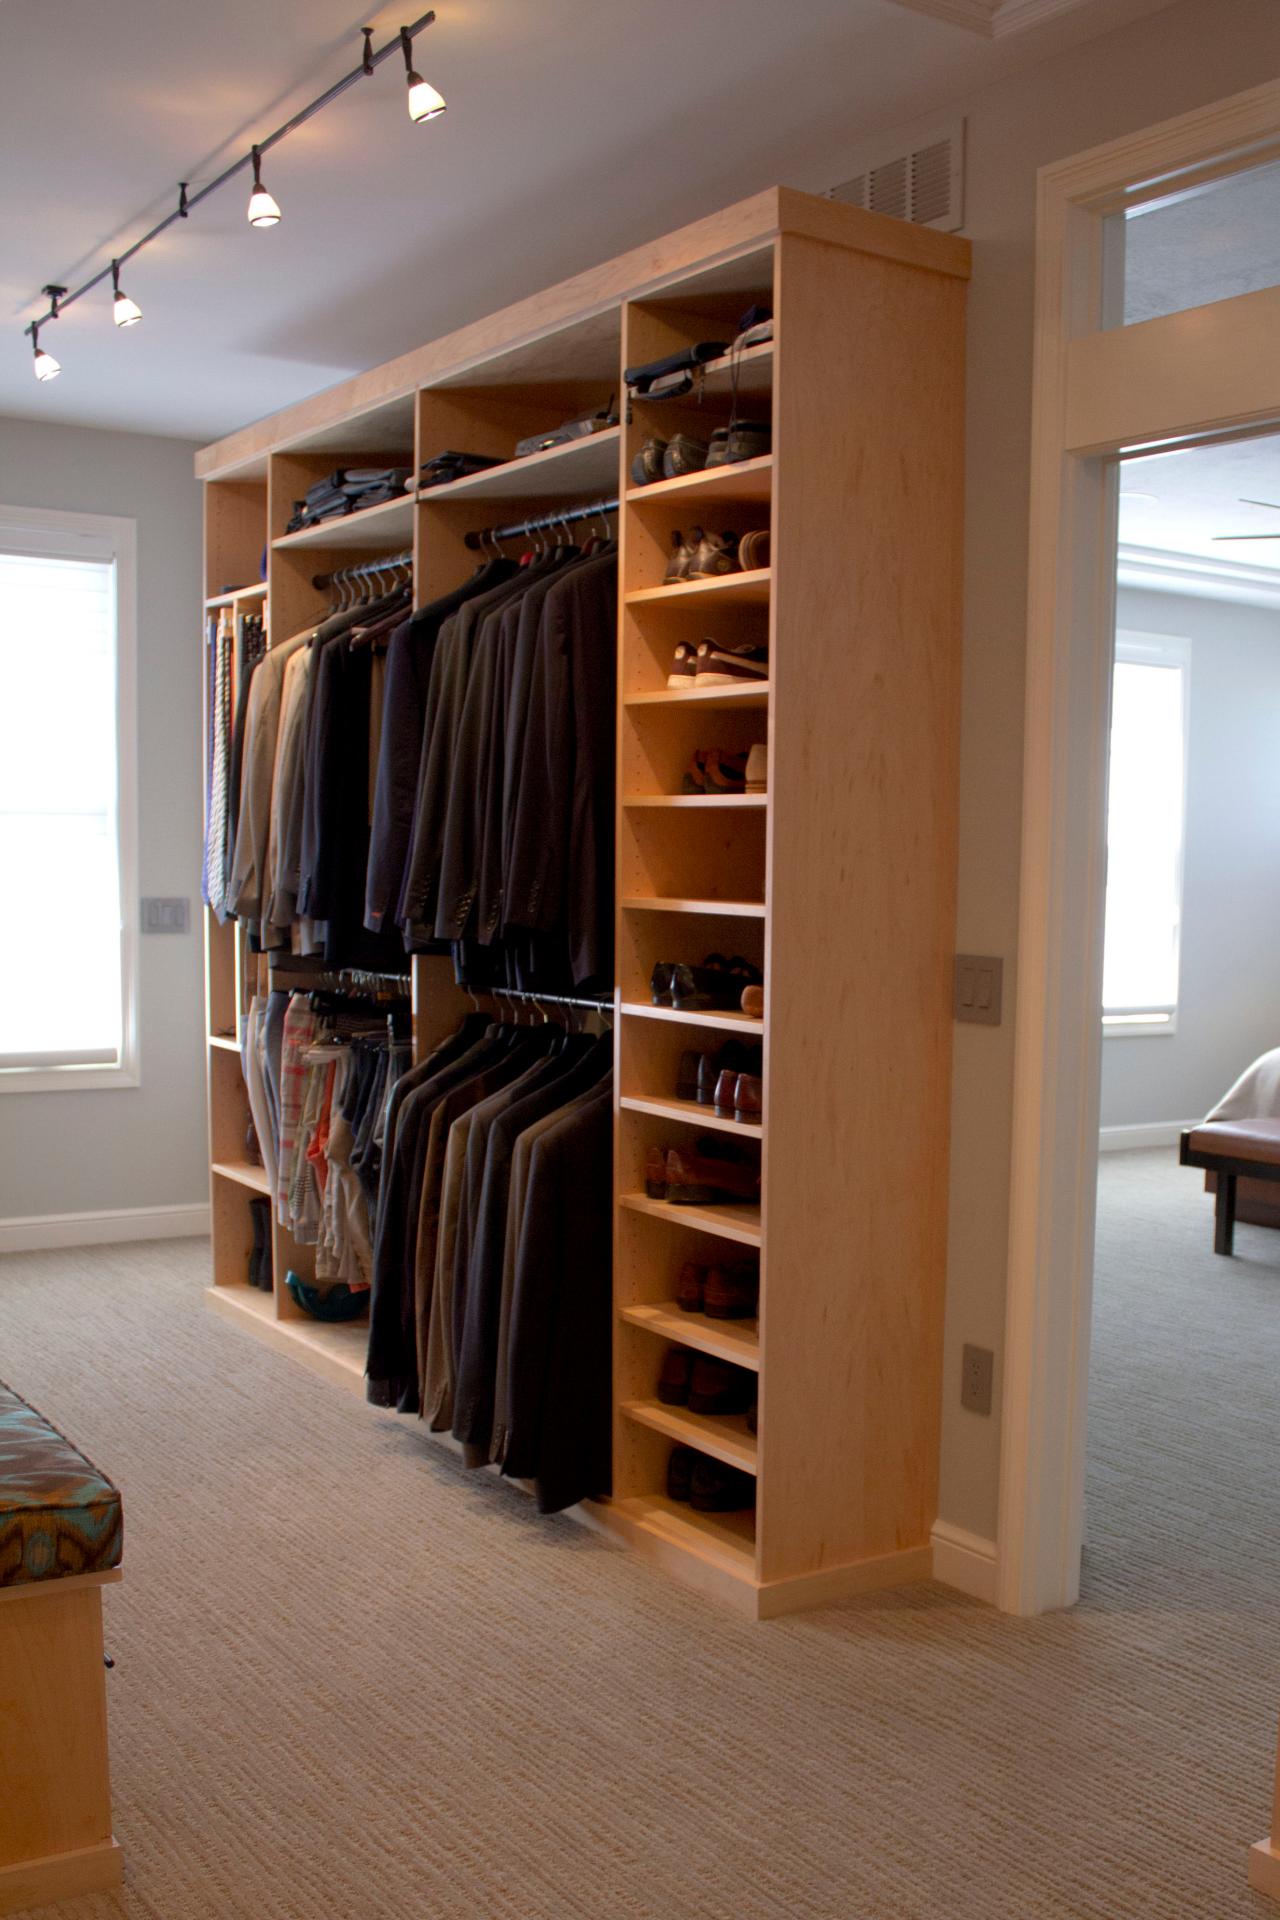 Contemporary Master Suite Walk-In Closet Features Coat Hanger and Shoe